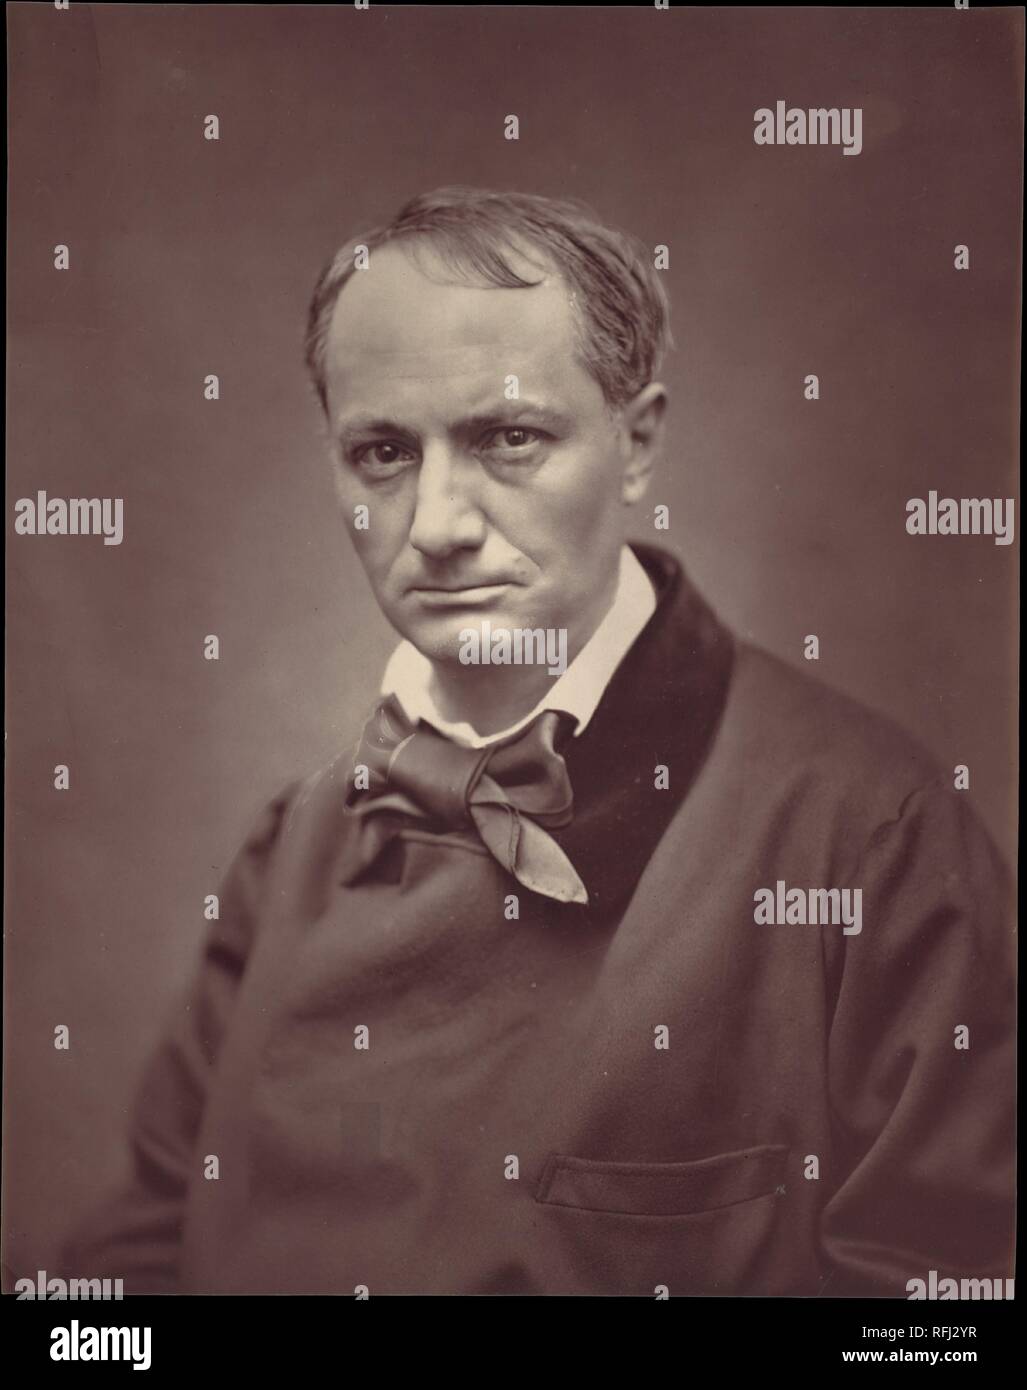 Charles Baudelaire. Artist: Étienne Carjat (French, Fareins 1828-1906 Paris). Printer: Goupil et Cie (French, active 1850-84). Date: ca. 1863.  Although the great French poet Baudelaire famously declared photography to be "the refuge of every would-be painter, every painter too ill-endowed or too lazy to complete his studies," he posed before the camera several times. This striking portrait of the brooding poet by Carjat is perhaps the best known, for it was published in the widely distributed series entitled Galerie contemporaine, littéraire, artistique.  The Galerie contemporaine is a high p Stock Photo